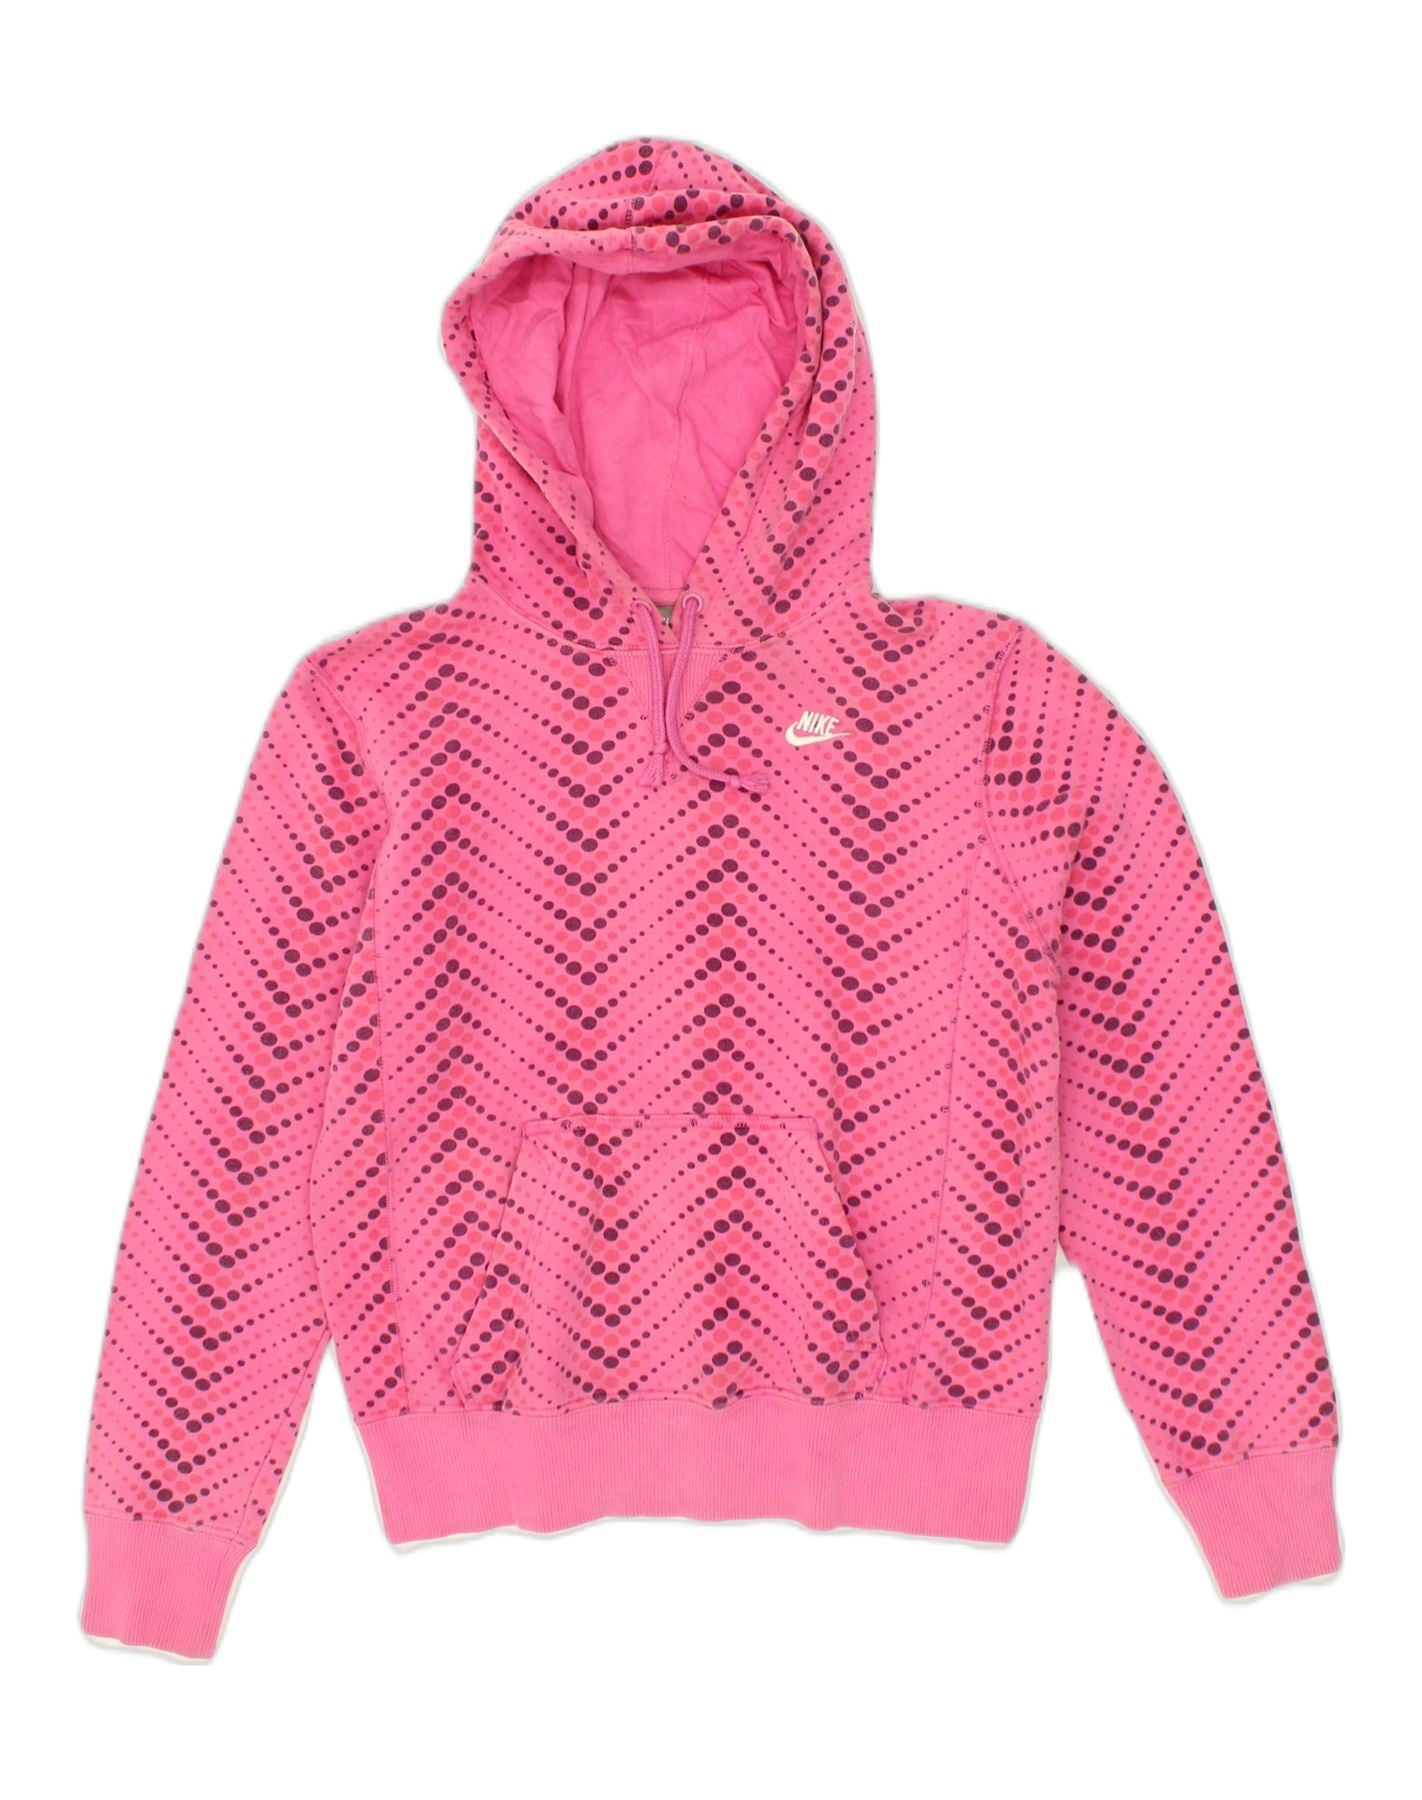 NIKE Womens Hoodie Jumper US 4/6 Small Pink Spotted Cotton, Vintage &  Second-Hand Clothing Online